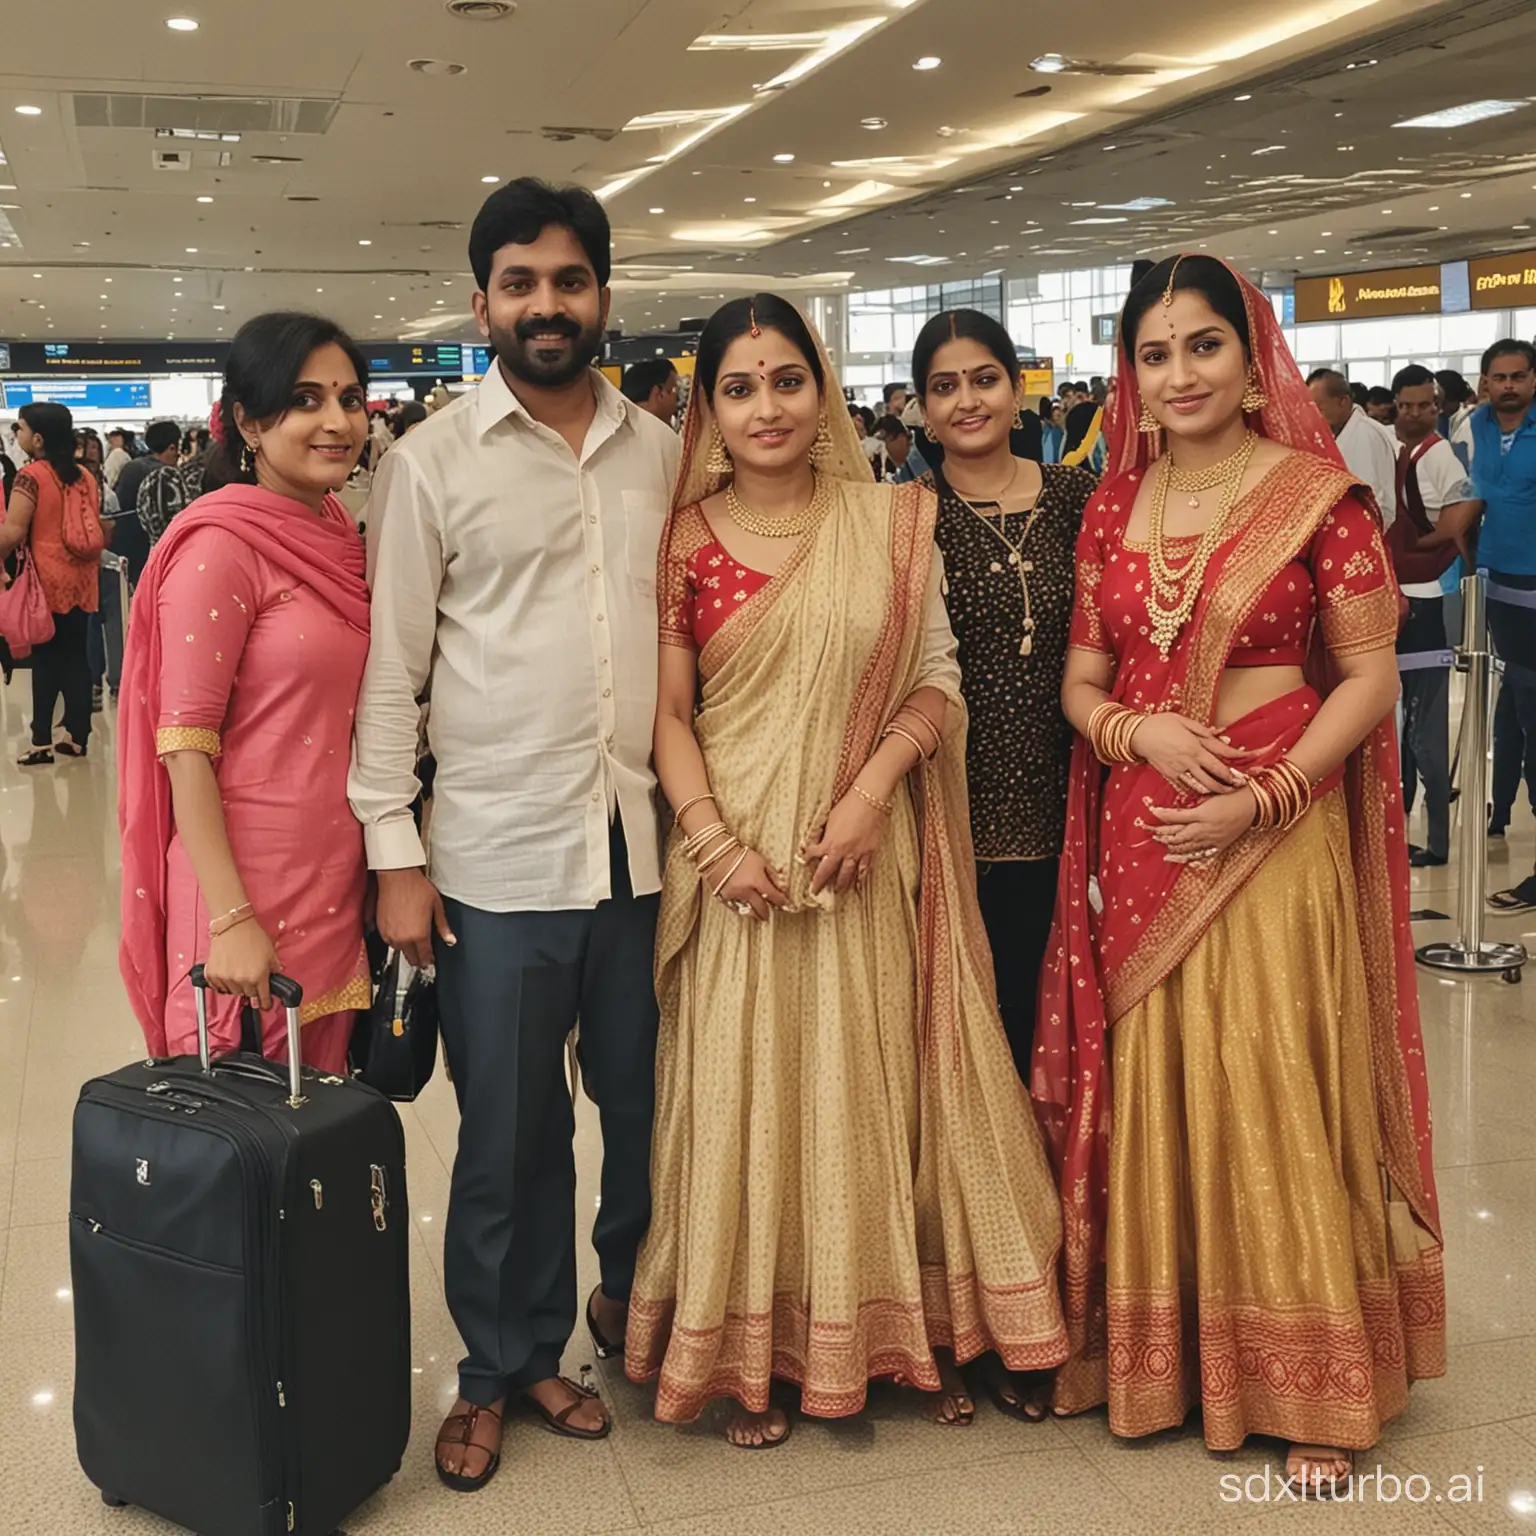 Indian-Family-Waiting-Together-at-the-Airport